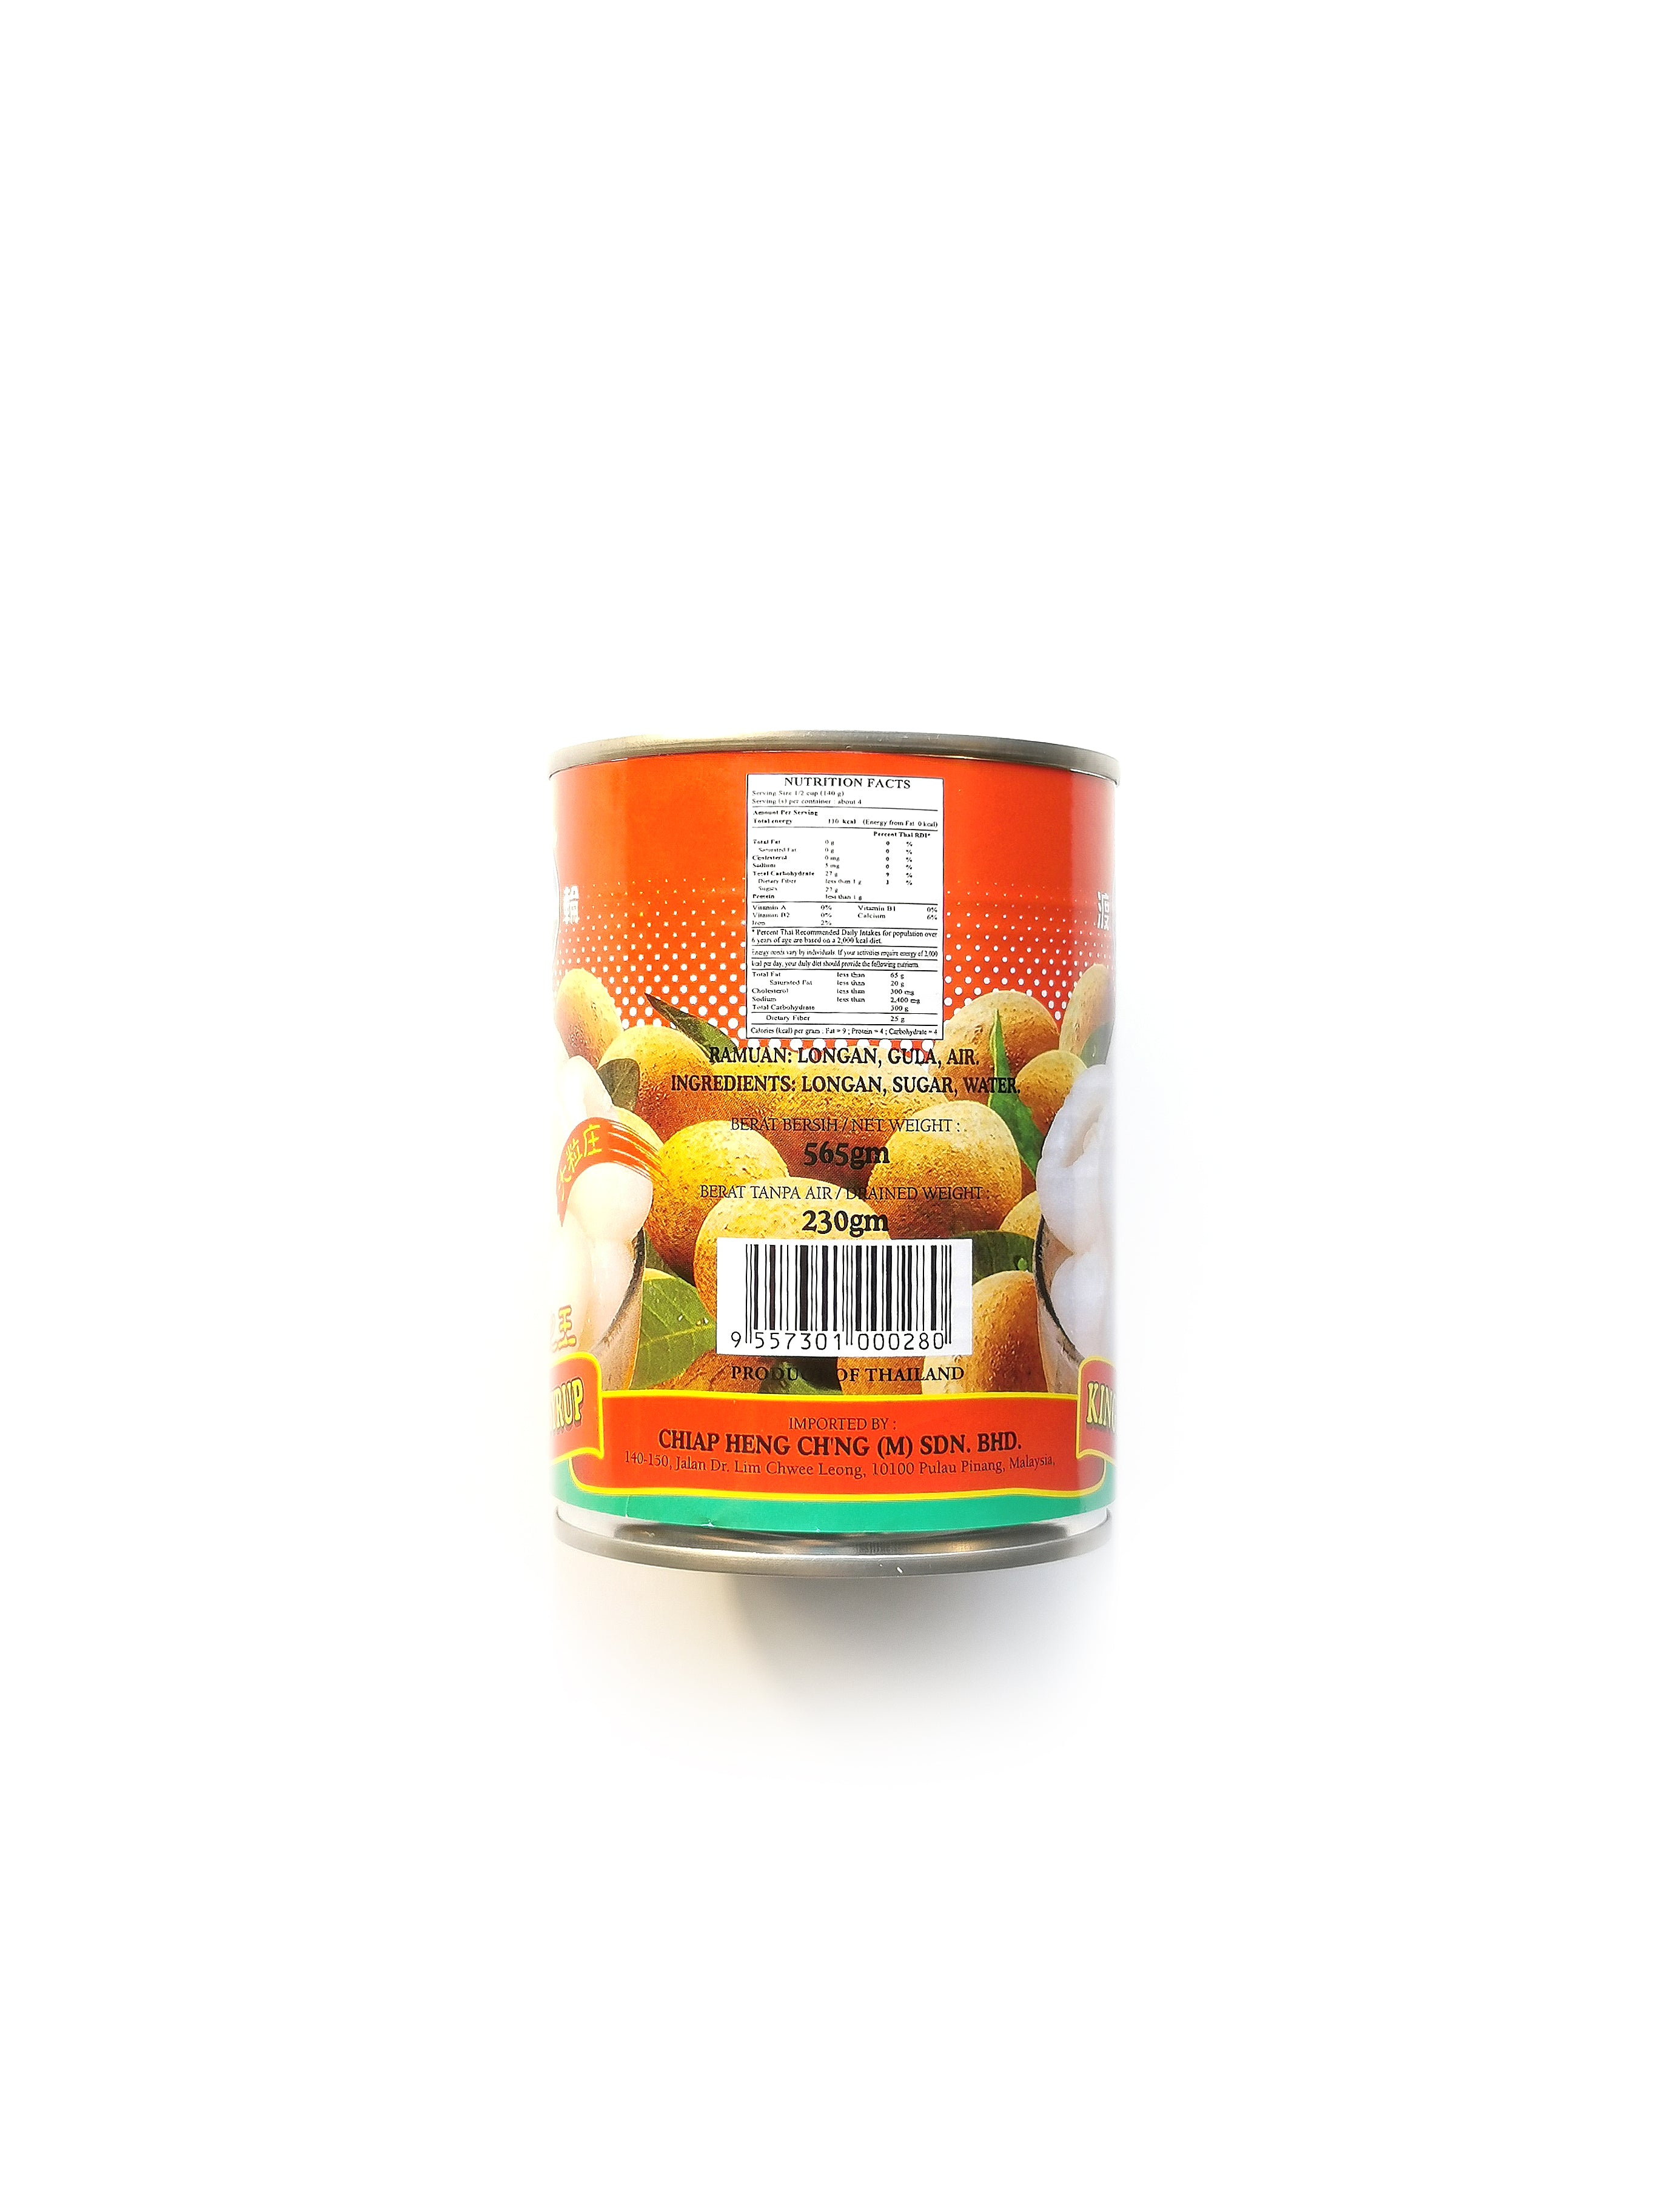 Ferry Brand King Longan in Syrup